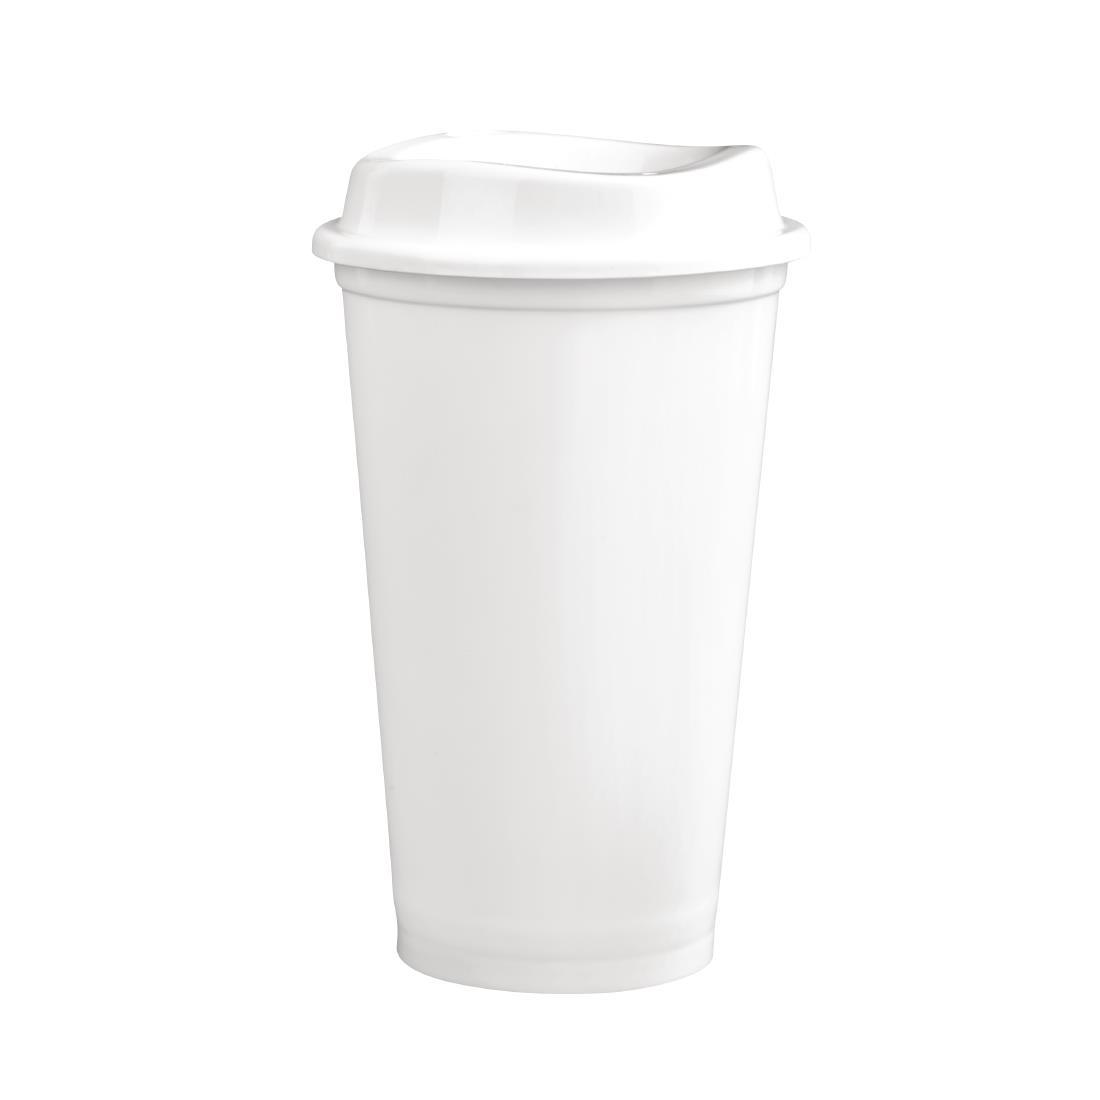 Olympia Polypropylene Reusable Coffee Cups 16oz (Pack of 25) - CW929  - 2